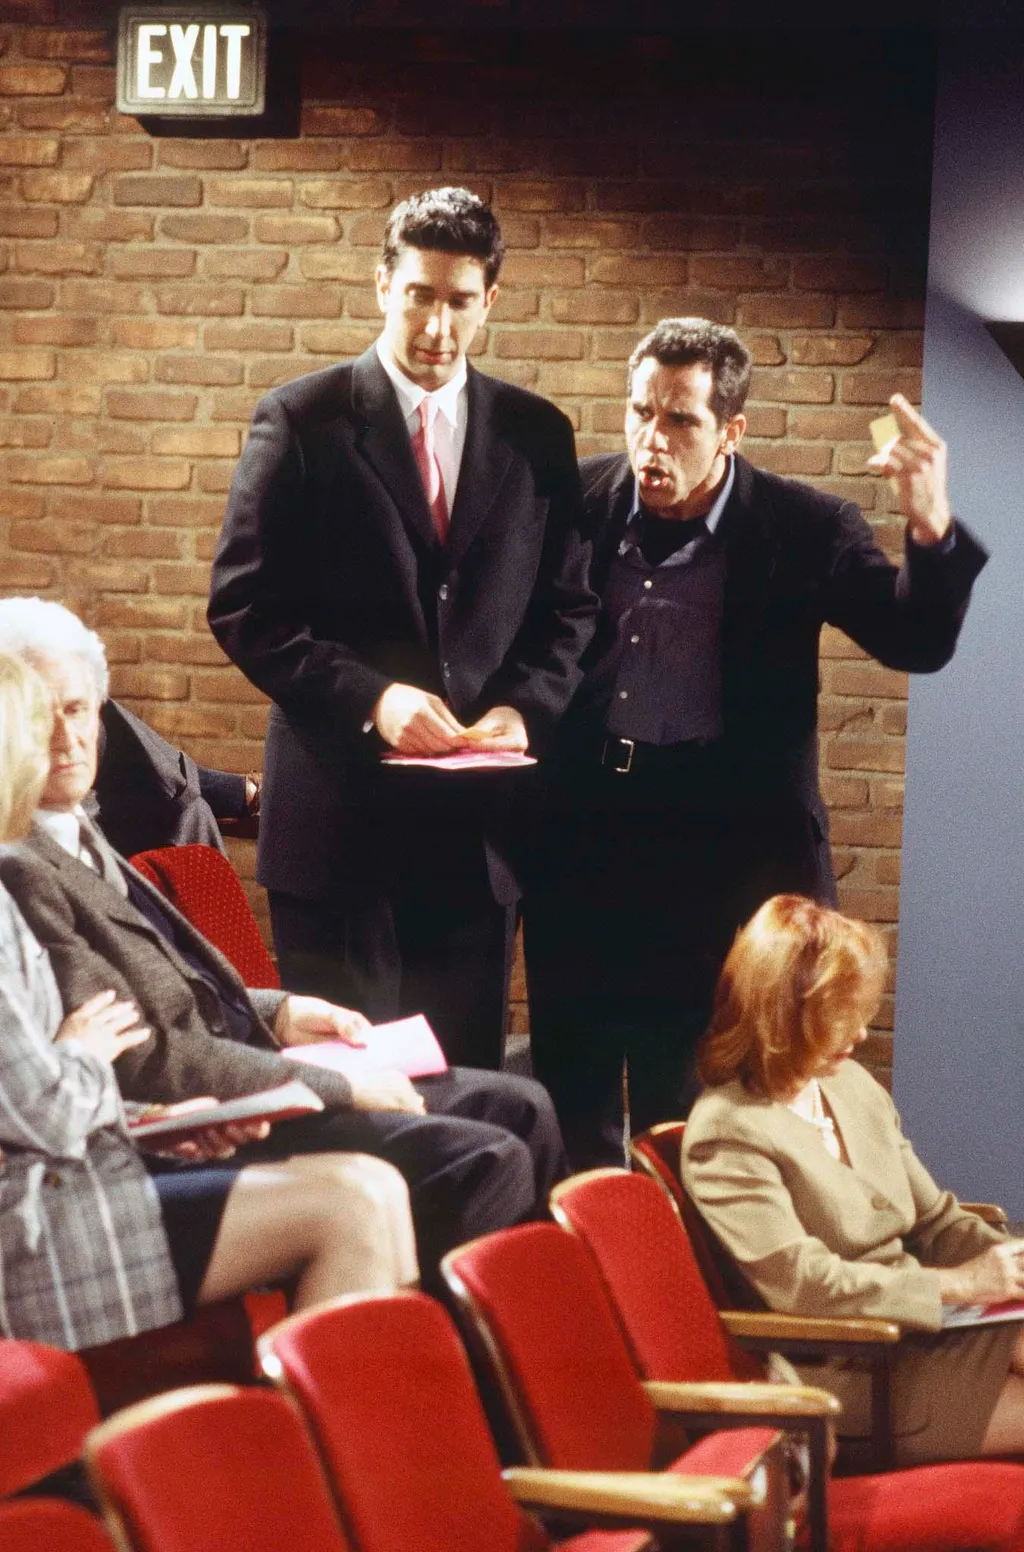 Friends 1990s|1996-1997|Agitated|Air Date 04/24/1997|Angry|color|comedy|Double|episodic|Facial Expression|gesture|gesturing|Guest Star|indoor|NBCU Photo Bank|NUP_100061|red tie|Screaming|Season 3|Select|sitcom|Suit|Two People|Vertical|Yelling FRIENDS -- "